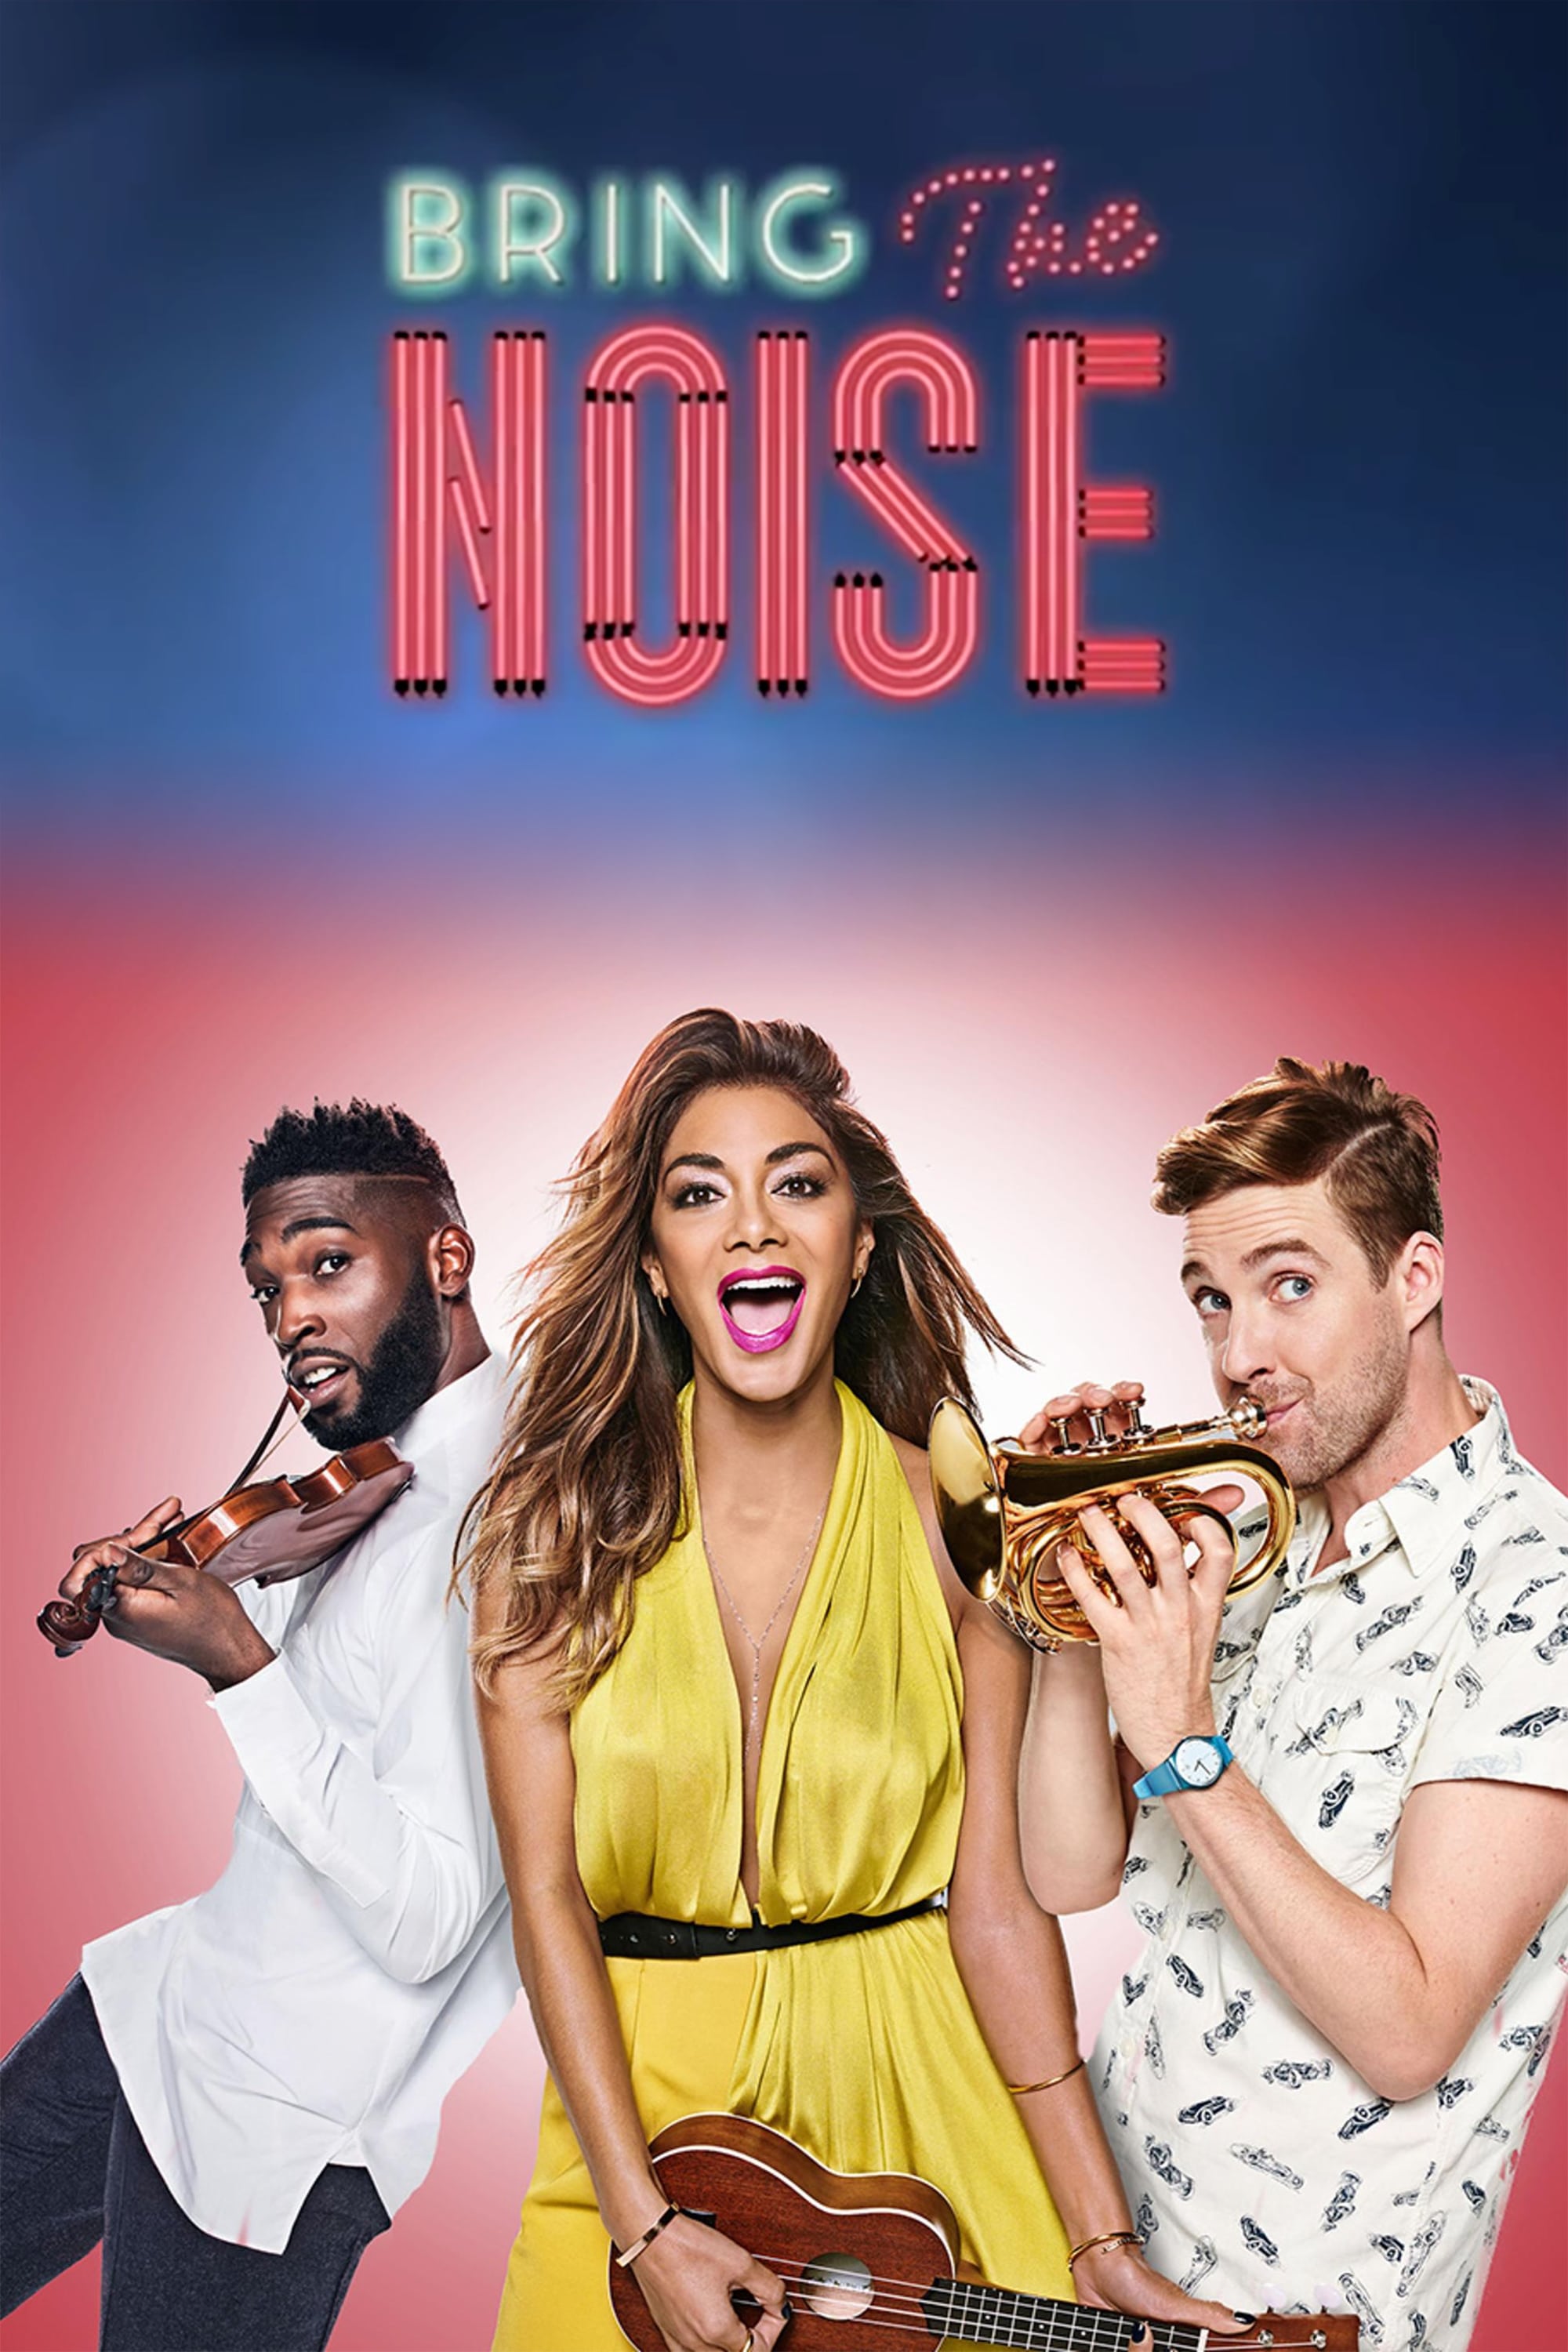 Bring the Noise (2015)